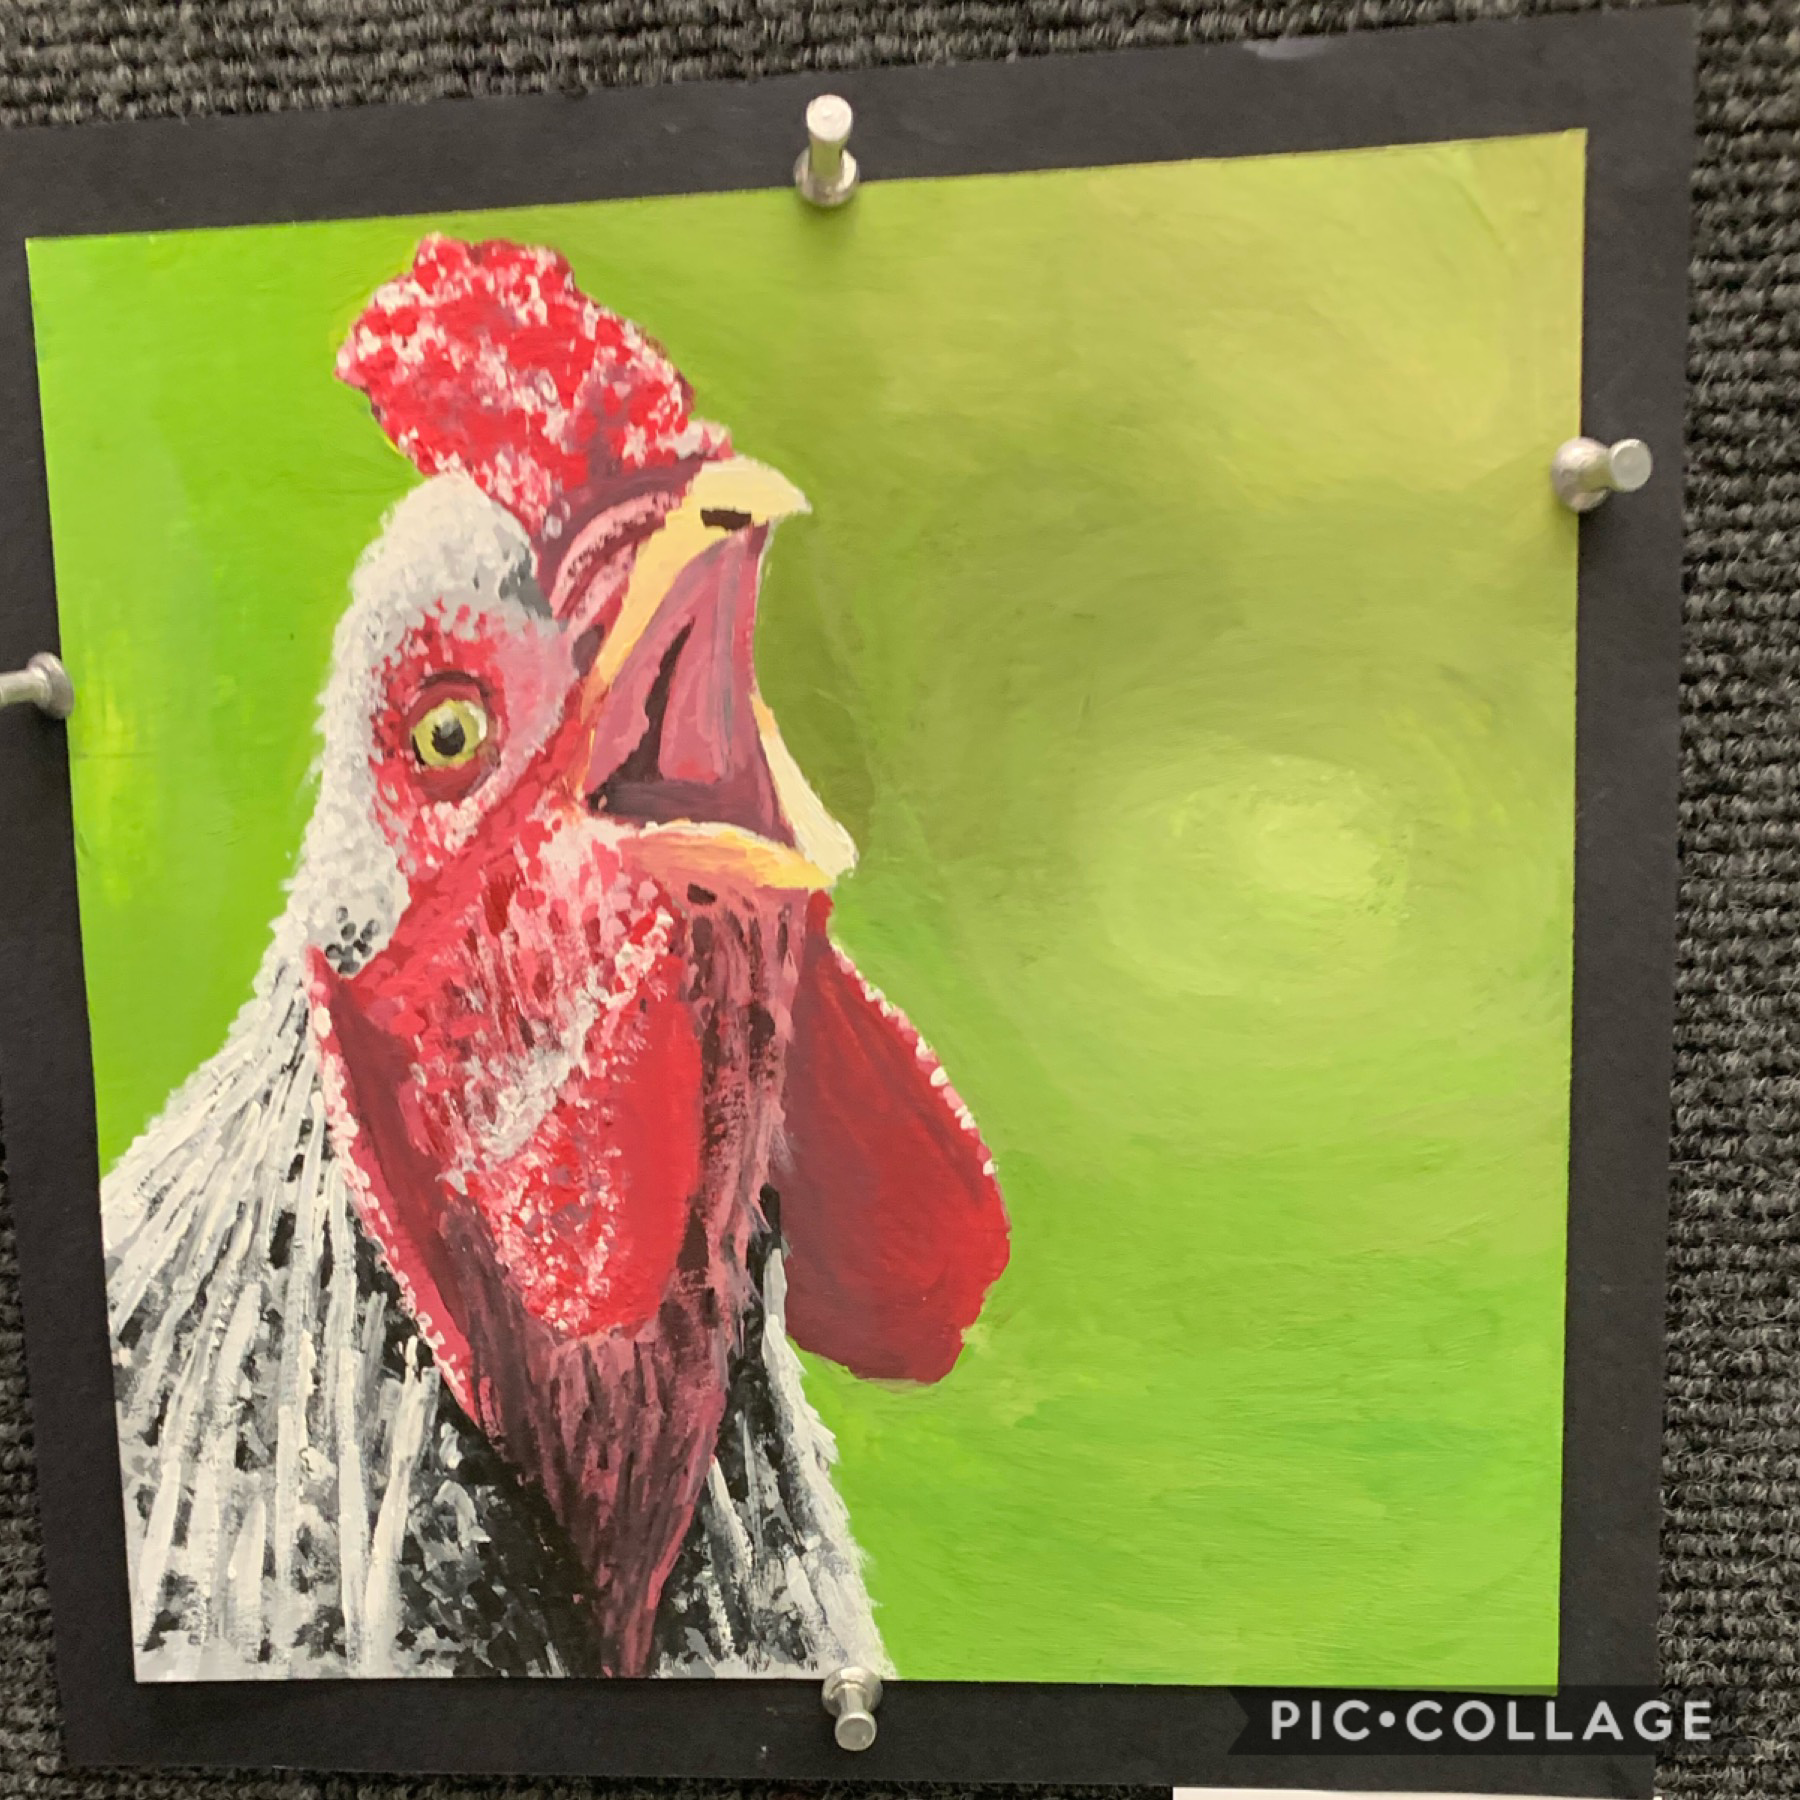 i painted a chicken. okay see u all in another three months 